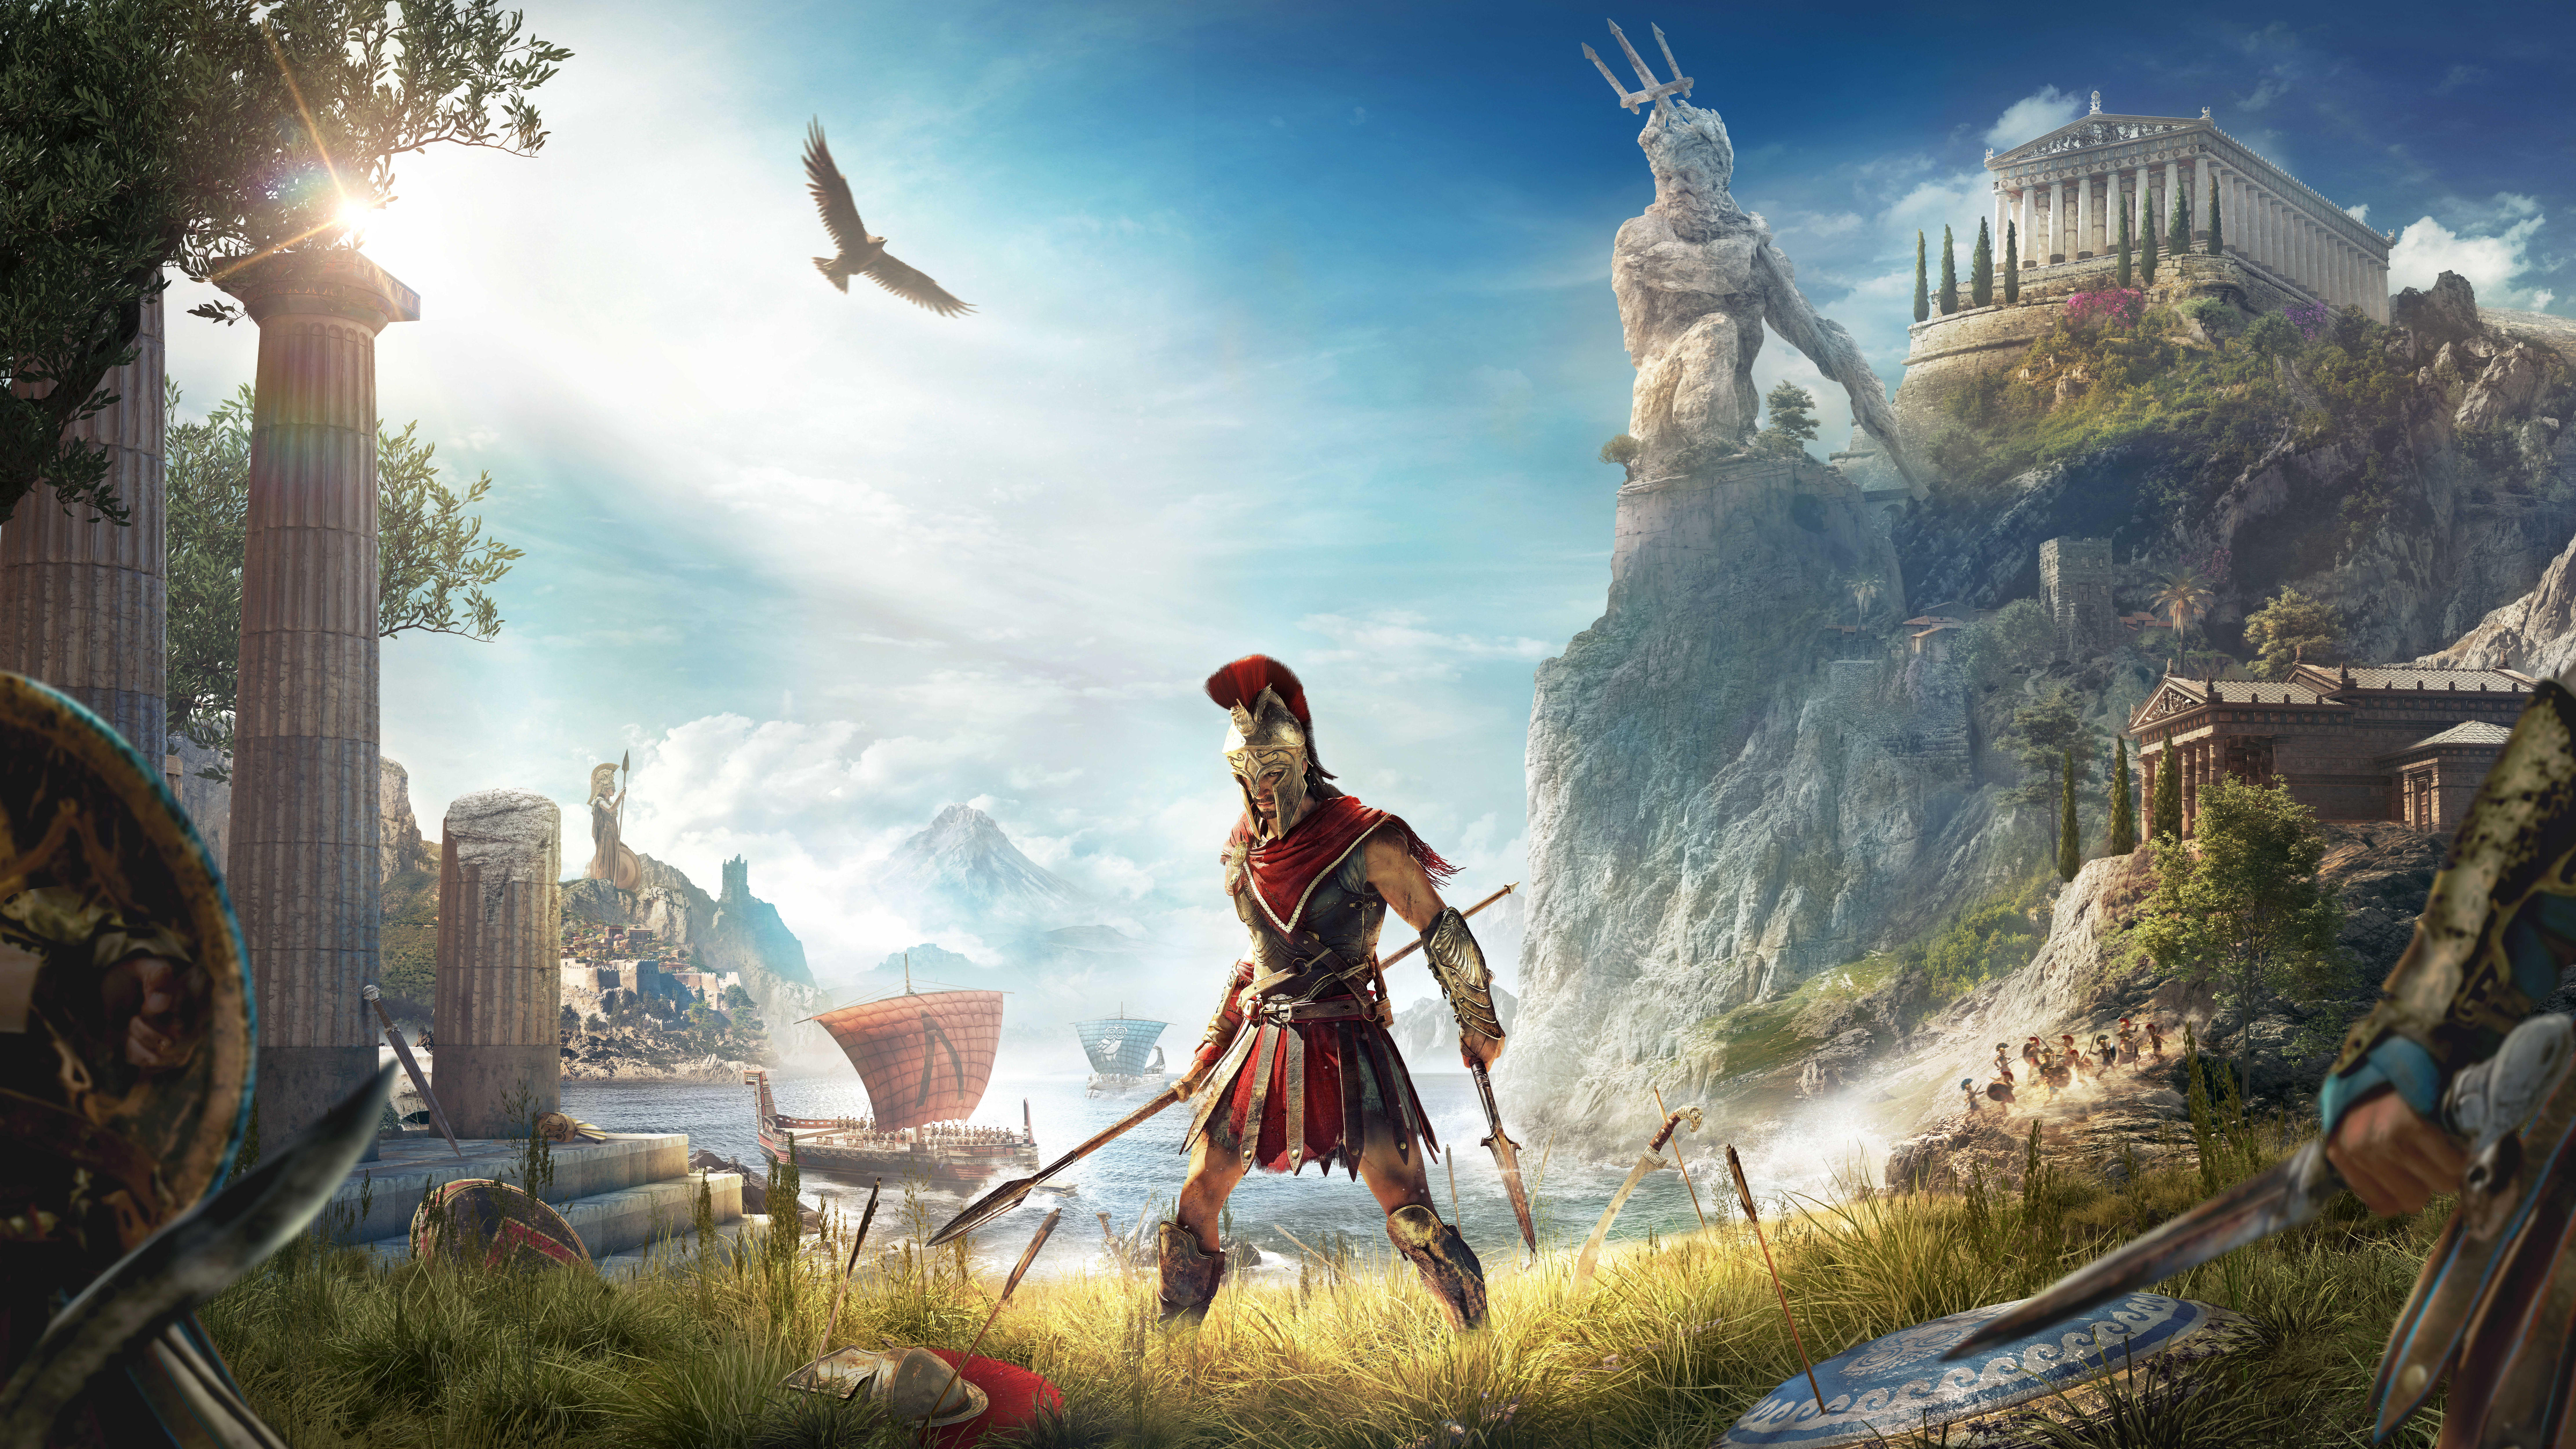 General 17778x10000 video games digital art artwork Assassin's Creed Ubisoft Greece Parthenon statue Alexios  Spartans Assassin's Creed: Odyssey